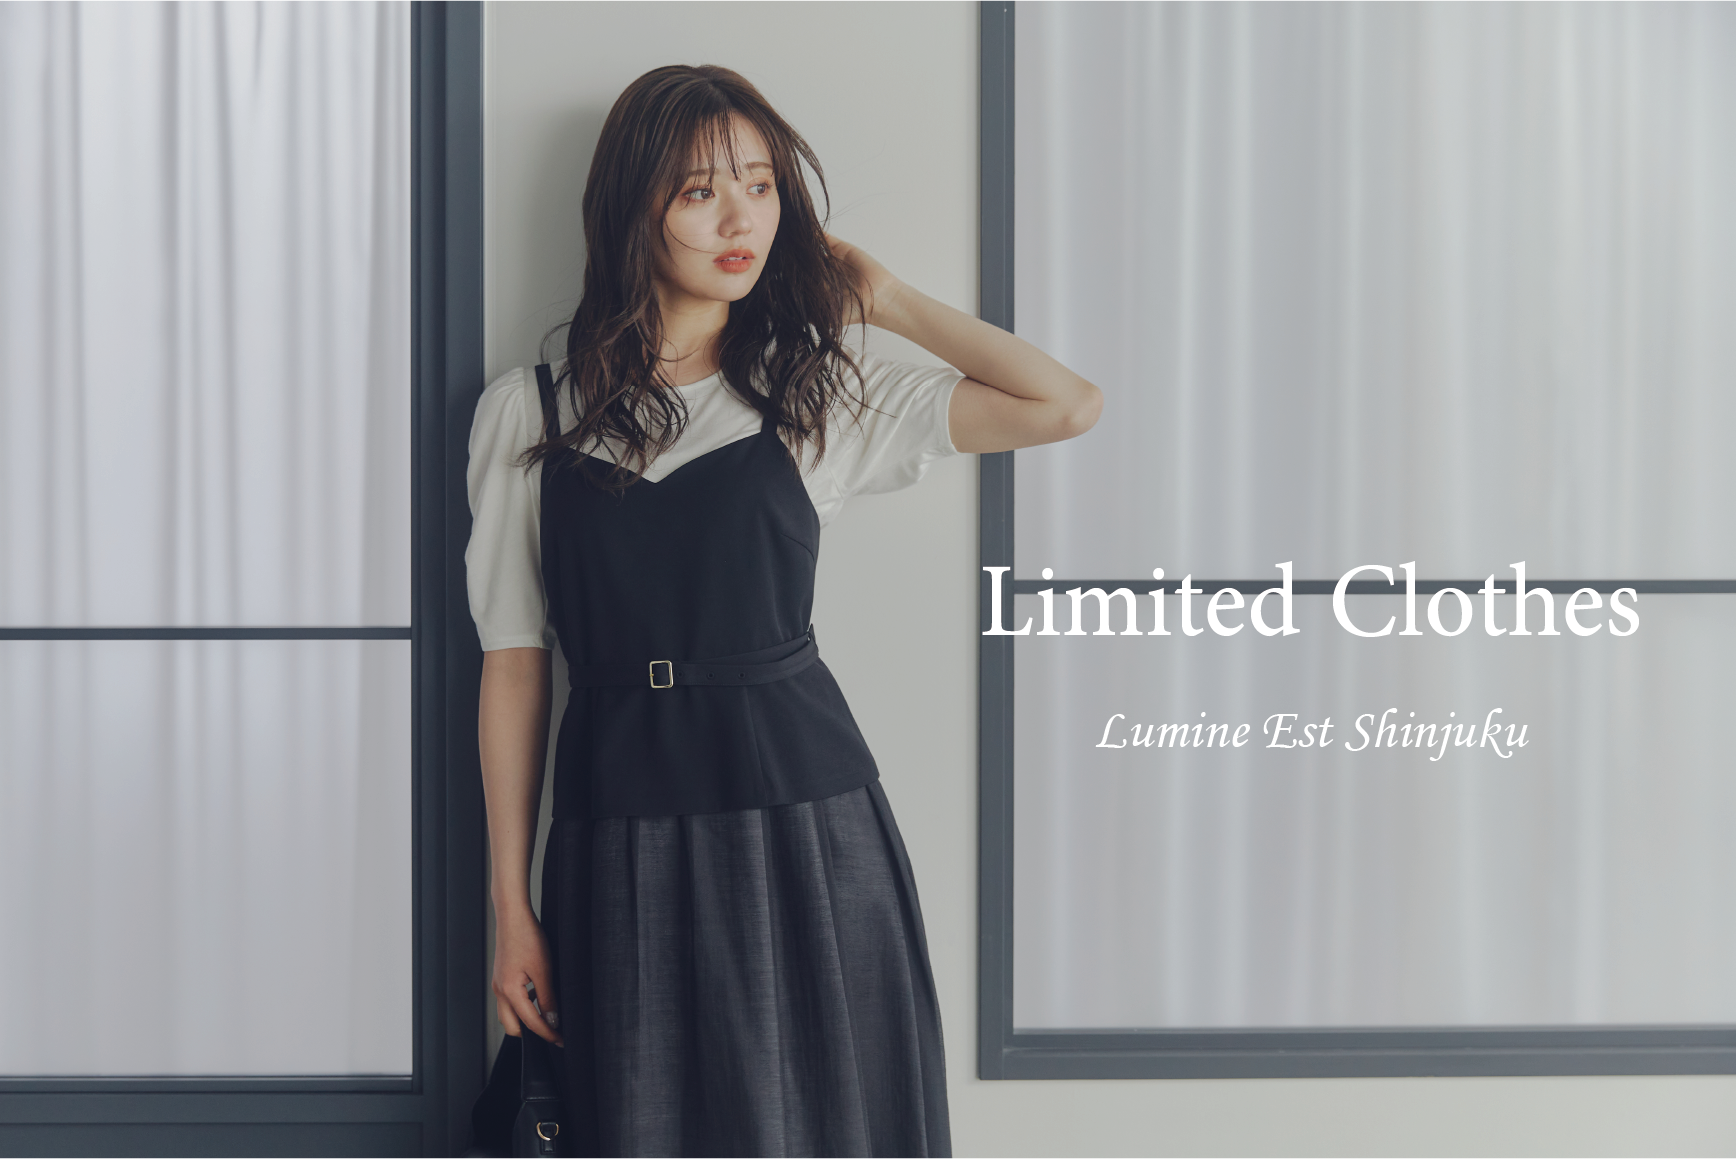 Limited Clothes